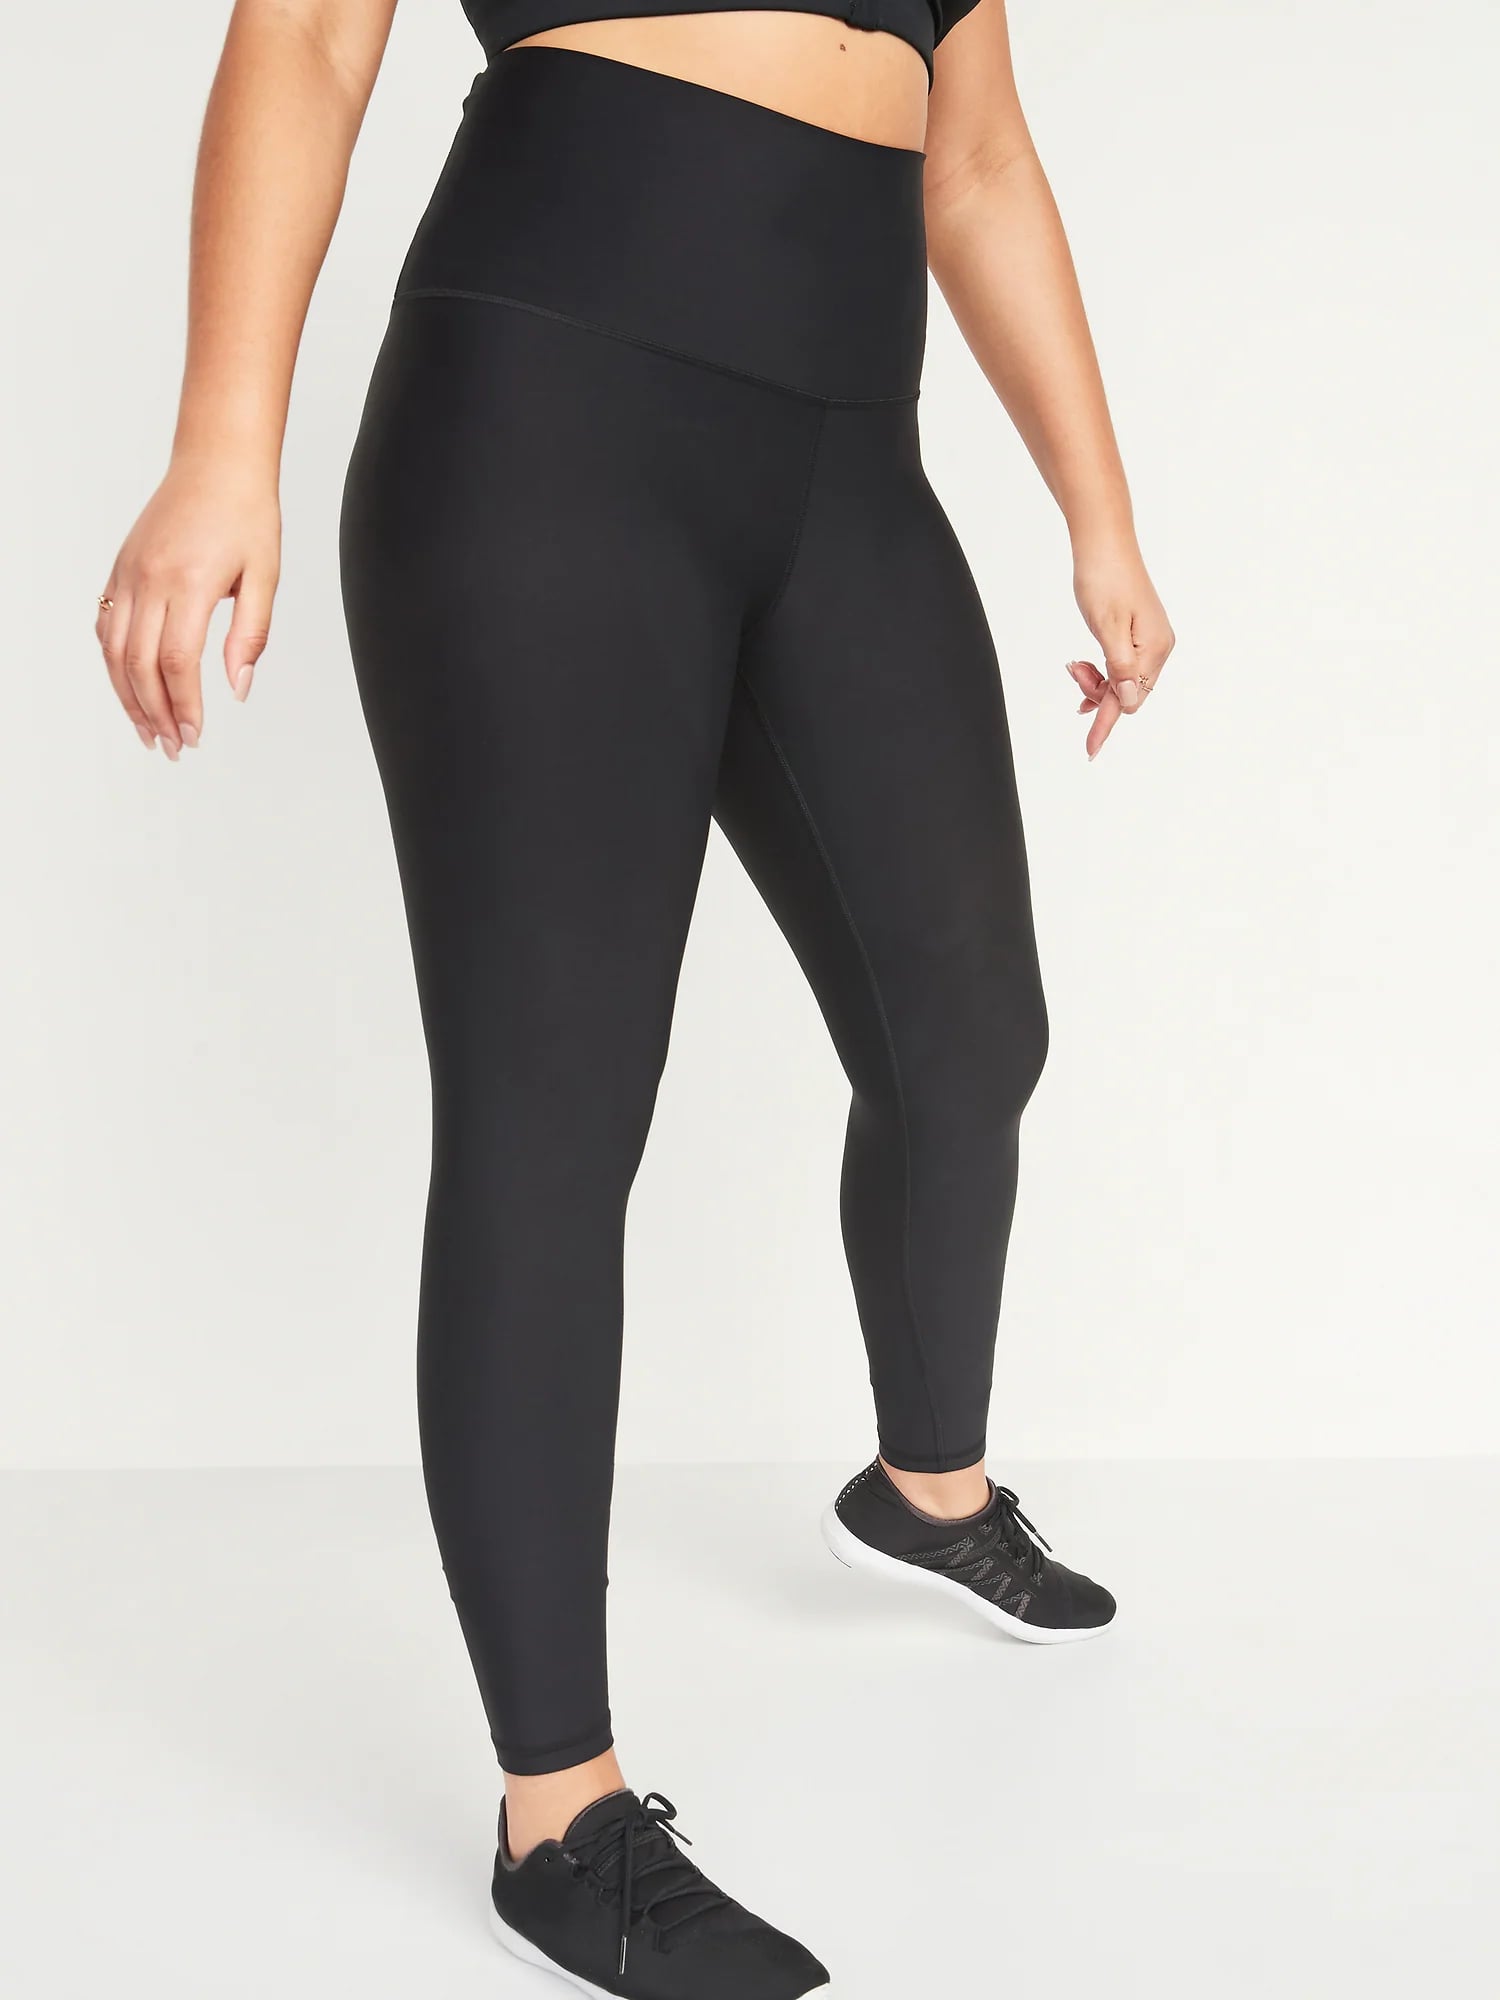 High-Waisted Workout Leggings From Old Navy